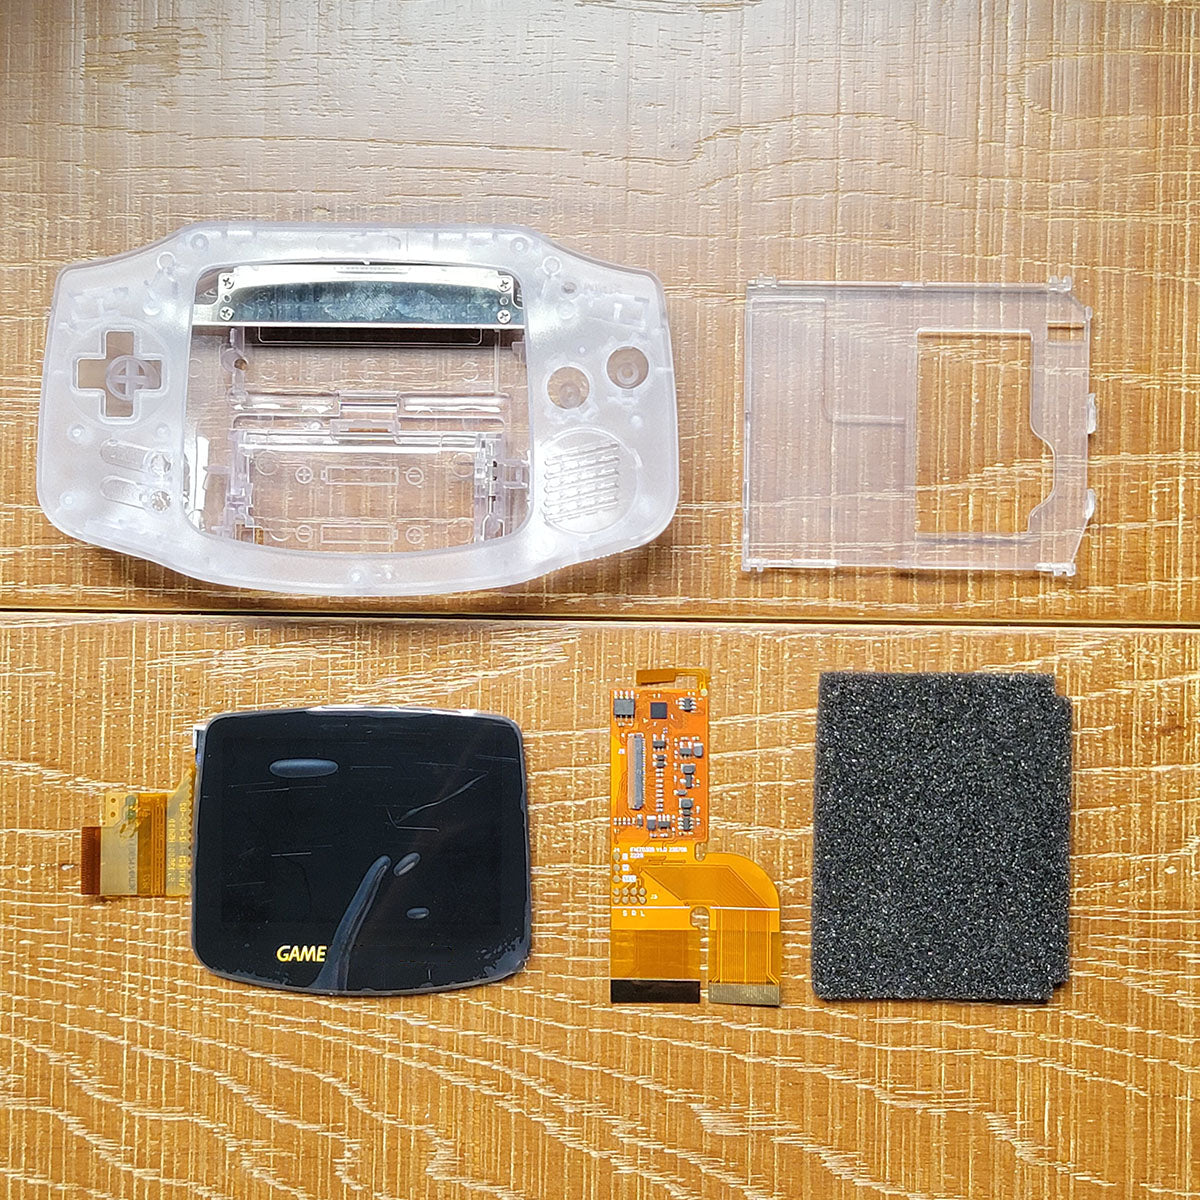 EASY TUTORIAL FOR GBA LAMINATE 3.0 IPS KIT – FunnyPlaying